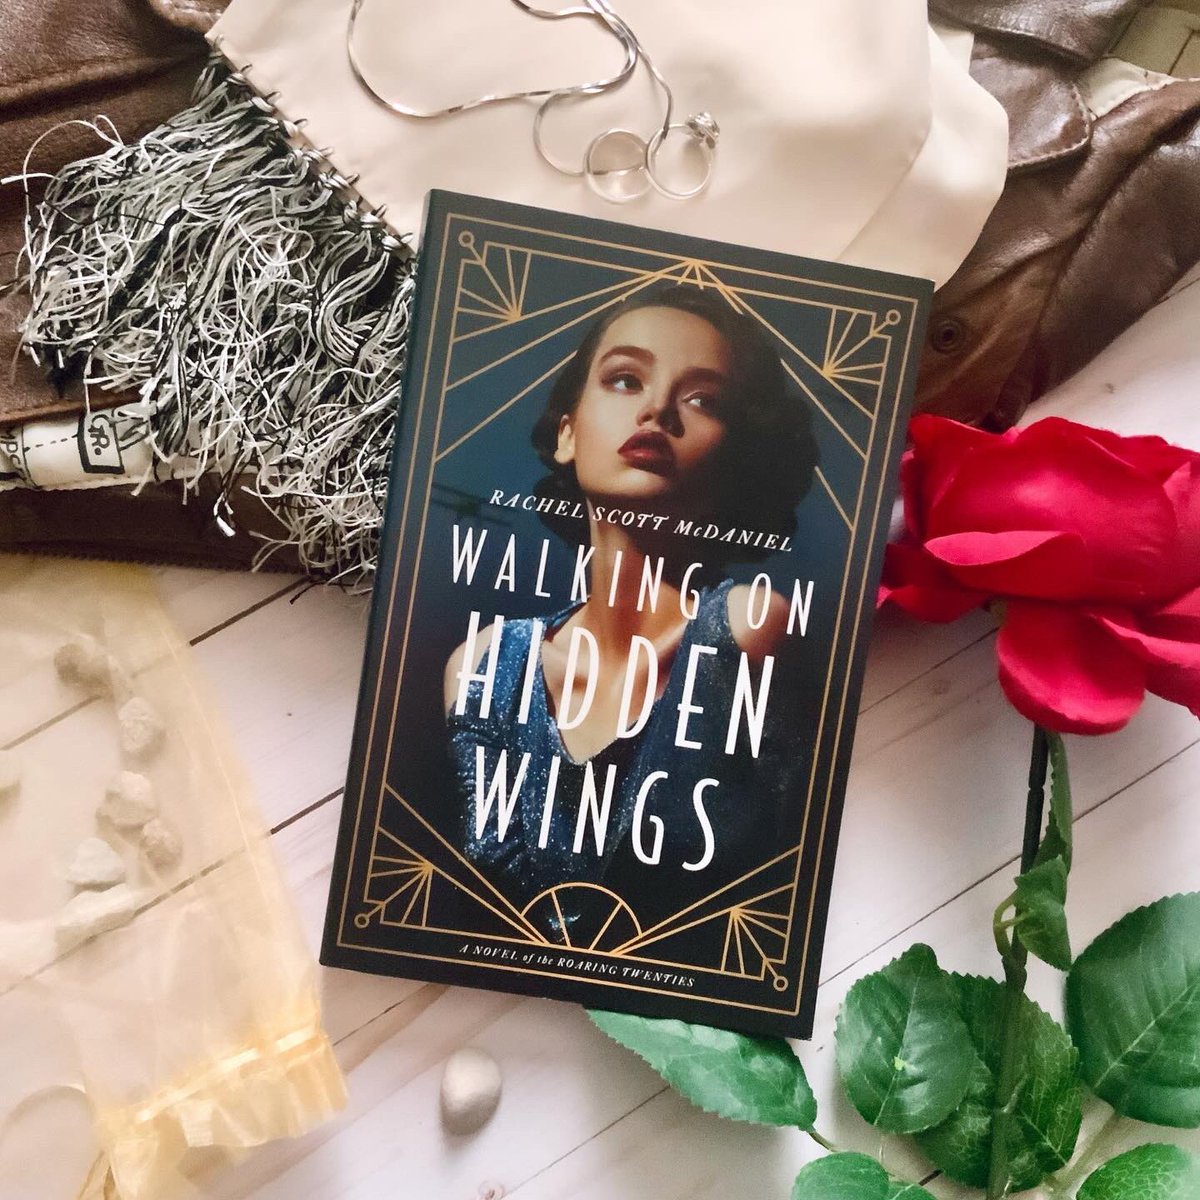 All the stars for this amazing historical romance! Check out my review: instagram.com/p/C6G-y6urqkB/… Now available here: a.co/d/3a903nL #walkingonhiddenwings #historicalmystery #historicalromance #roaring20s #barnstorming #kregelbooks #rachelscottmcdaniel #newbook #BookX